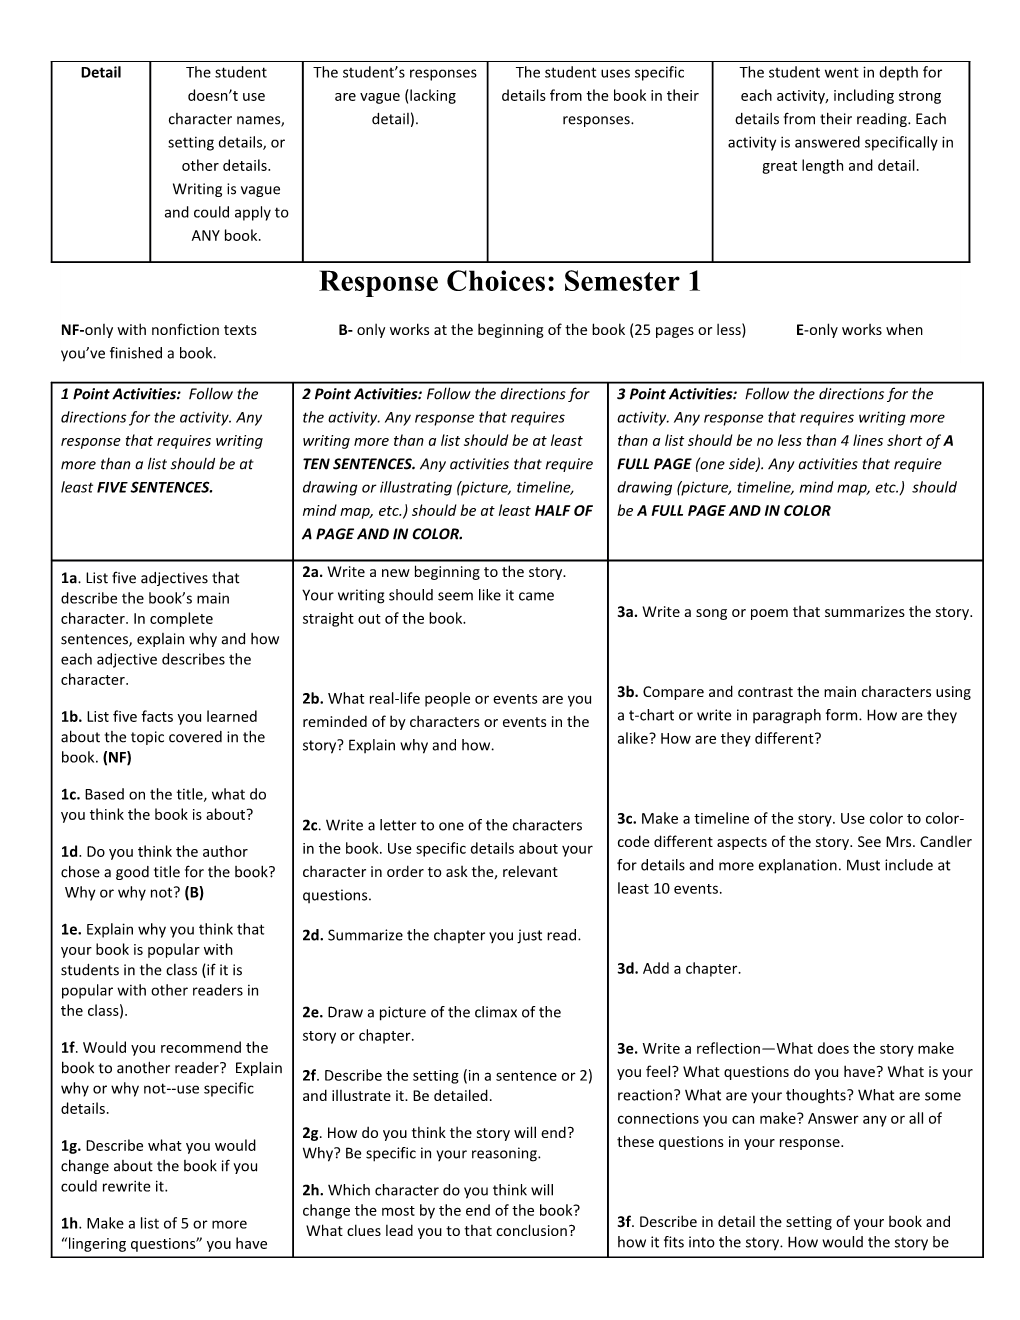 Weekly Reading Response Guidelines